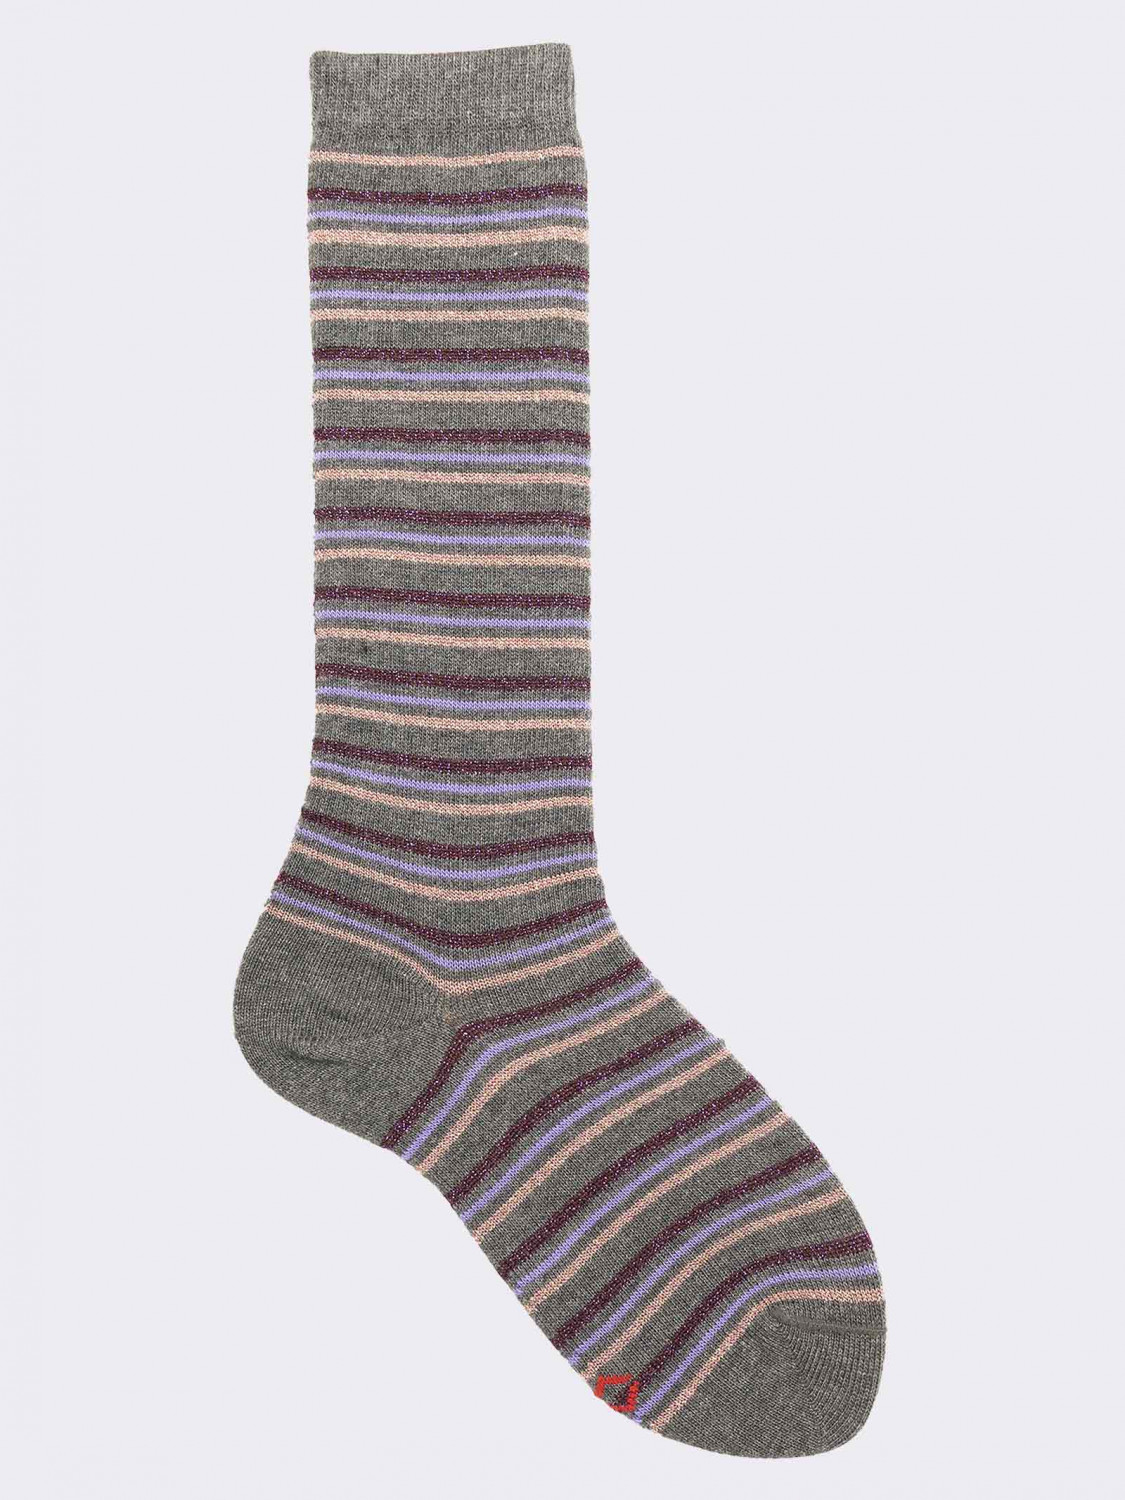 Girl's knee-highs striped patterned in warm cotton